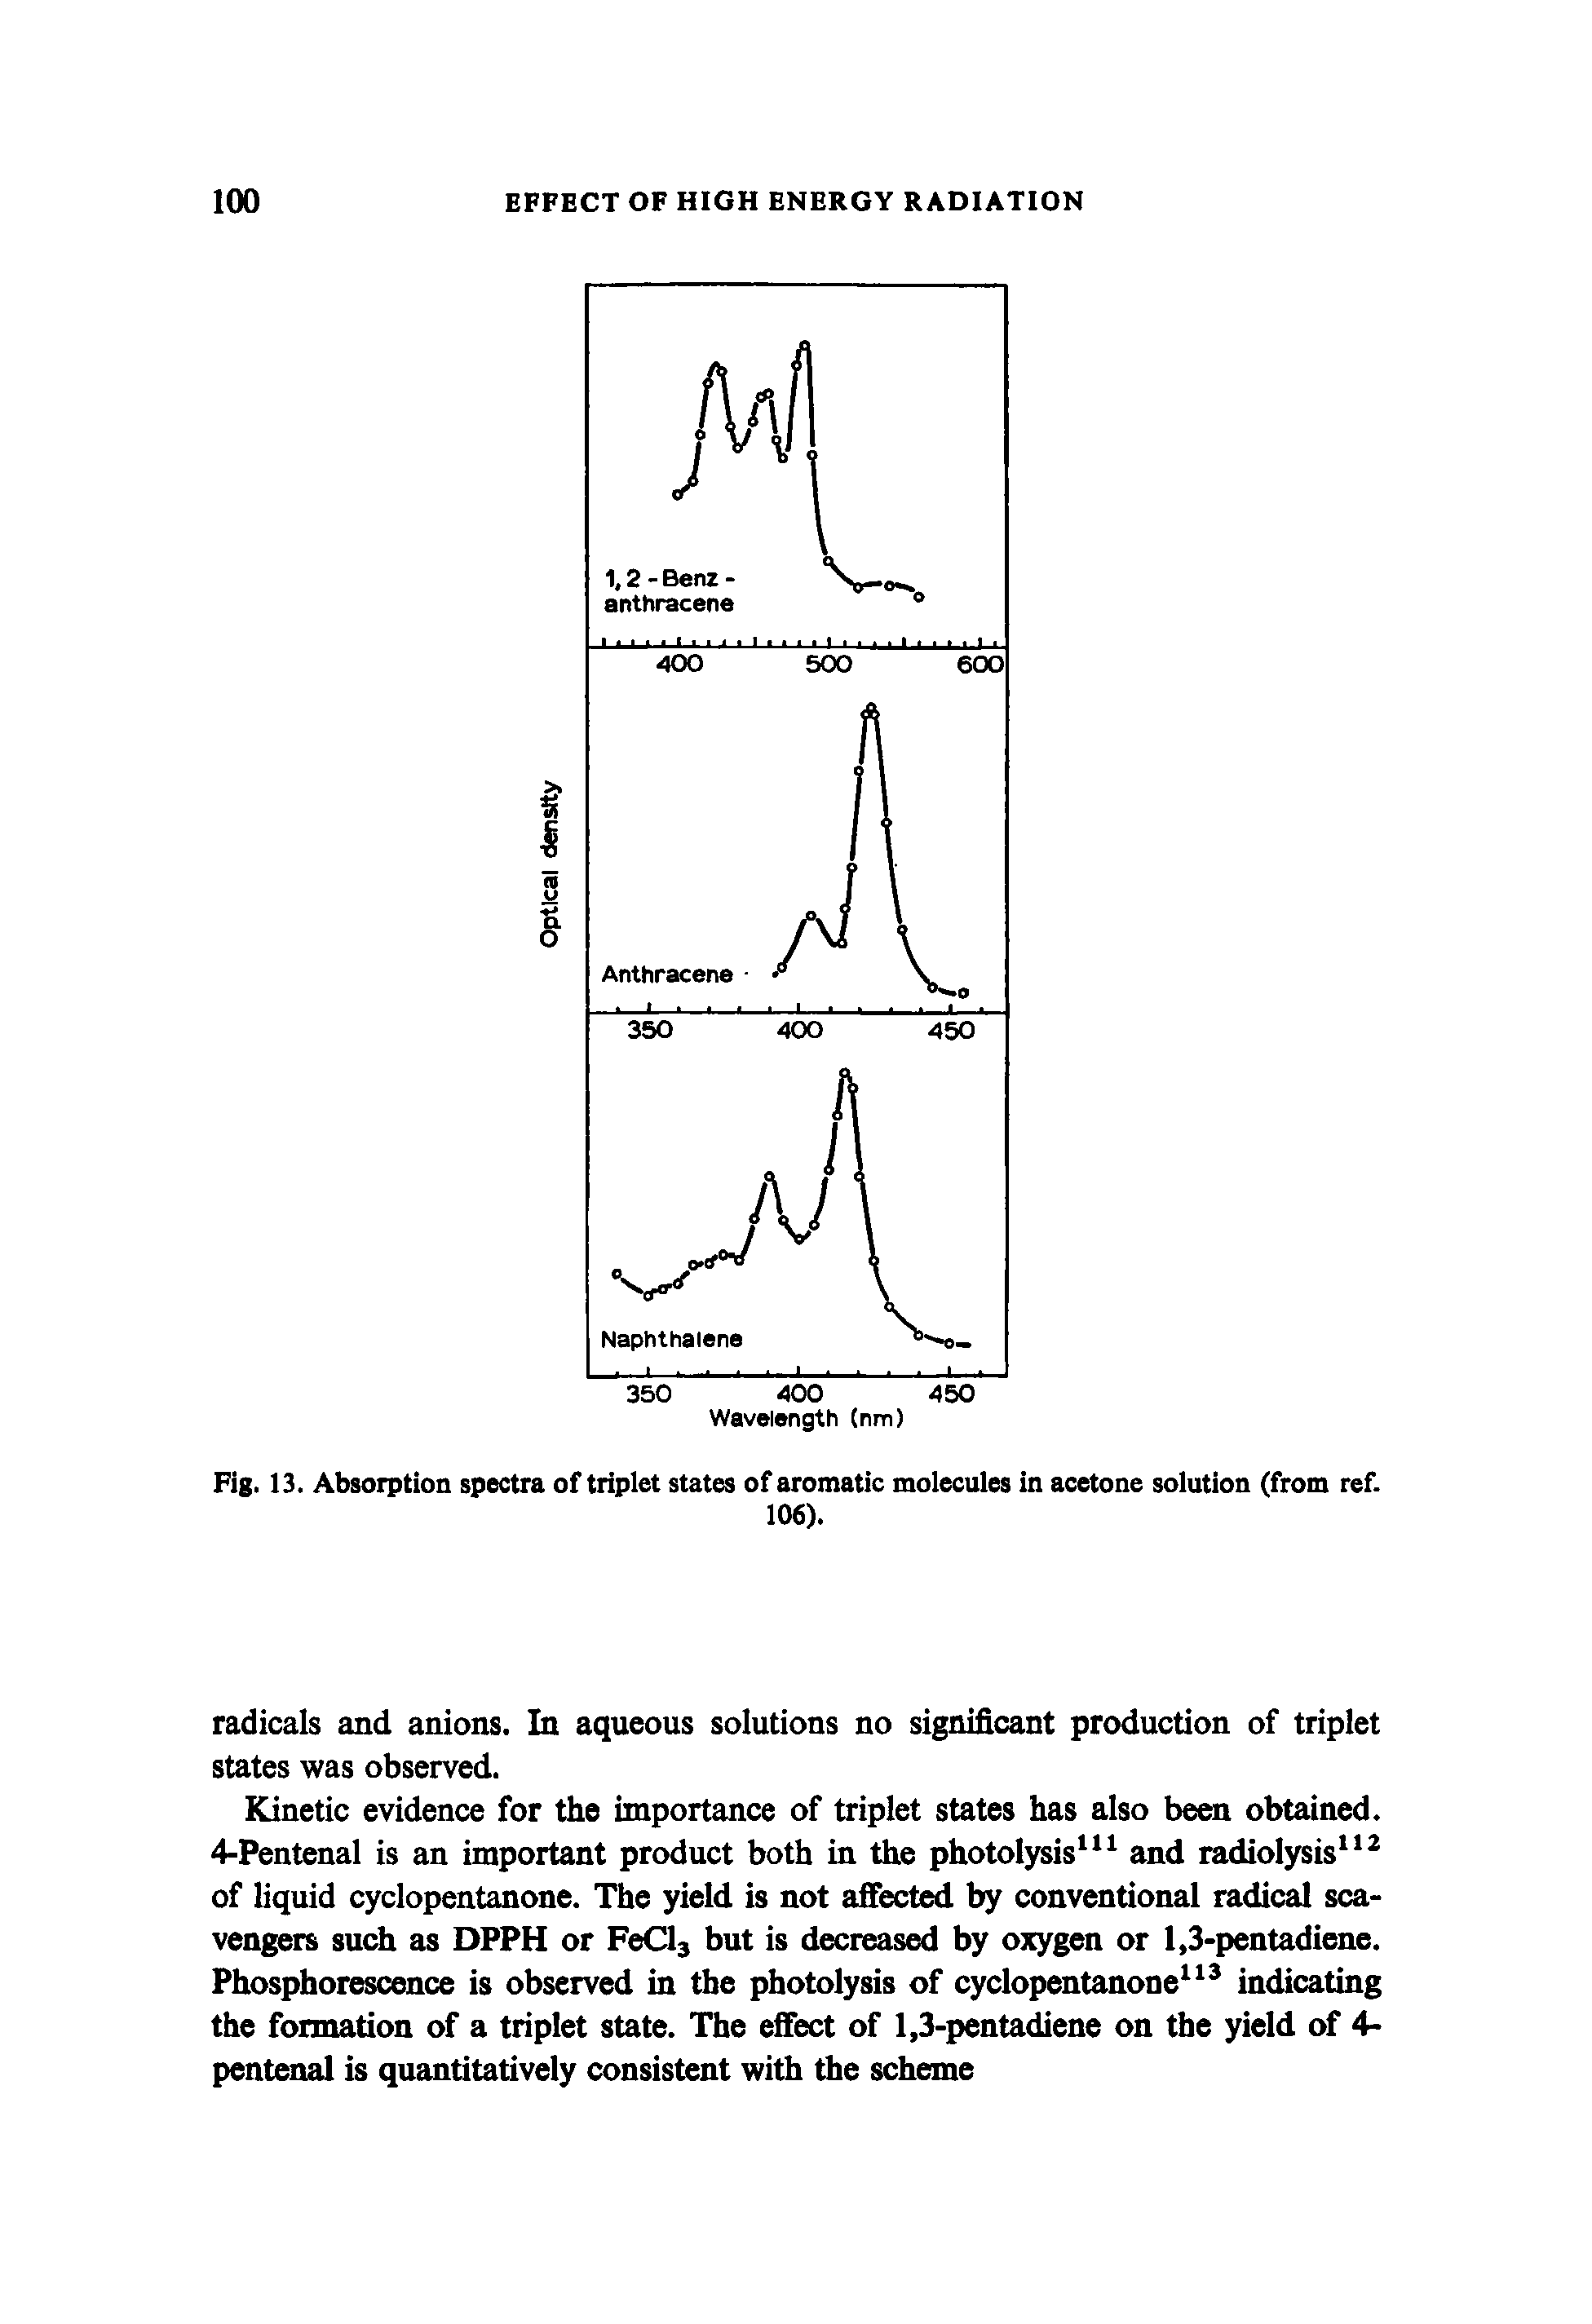 Fig. 13. Absorption spectra of triplet states of aromatic molecules in acetone solution (from ref.